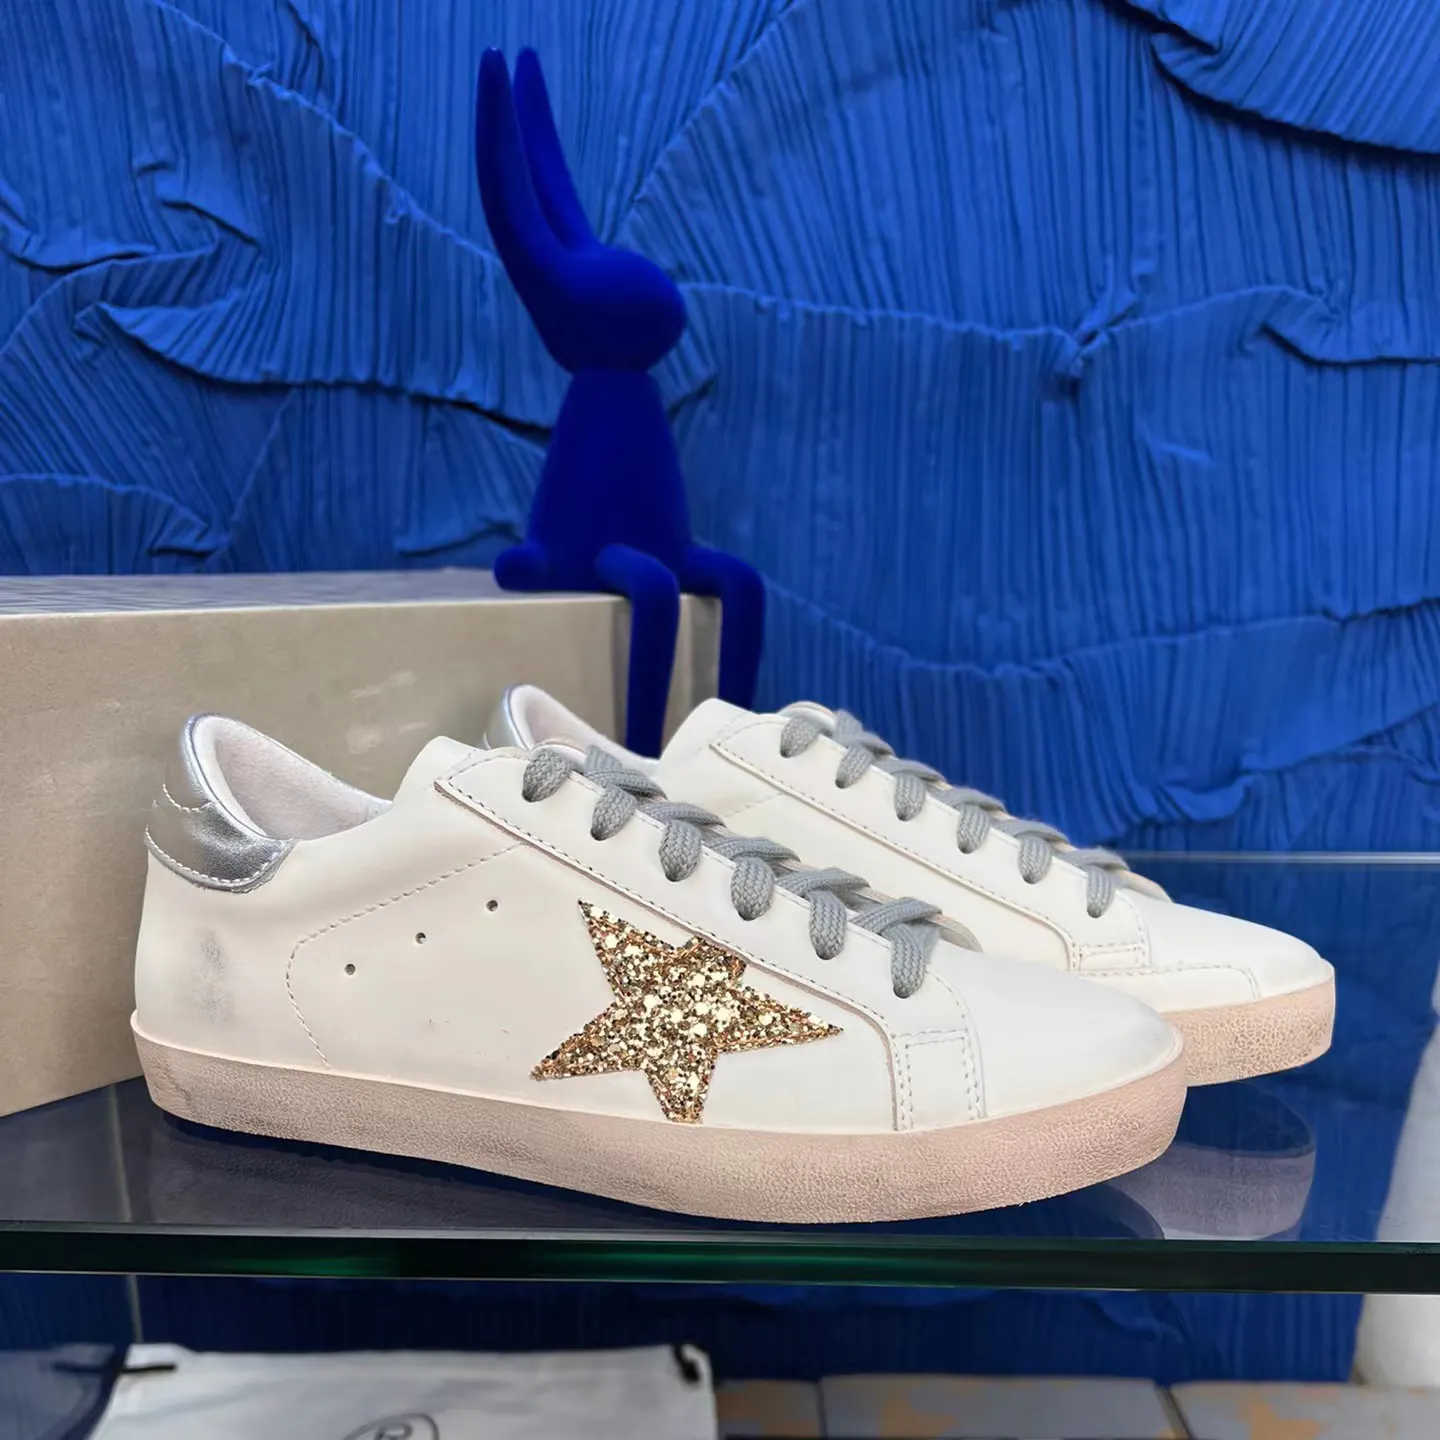 Goldens White Leather Super-Star Sneakers Women Men walking Style Dirty shoes